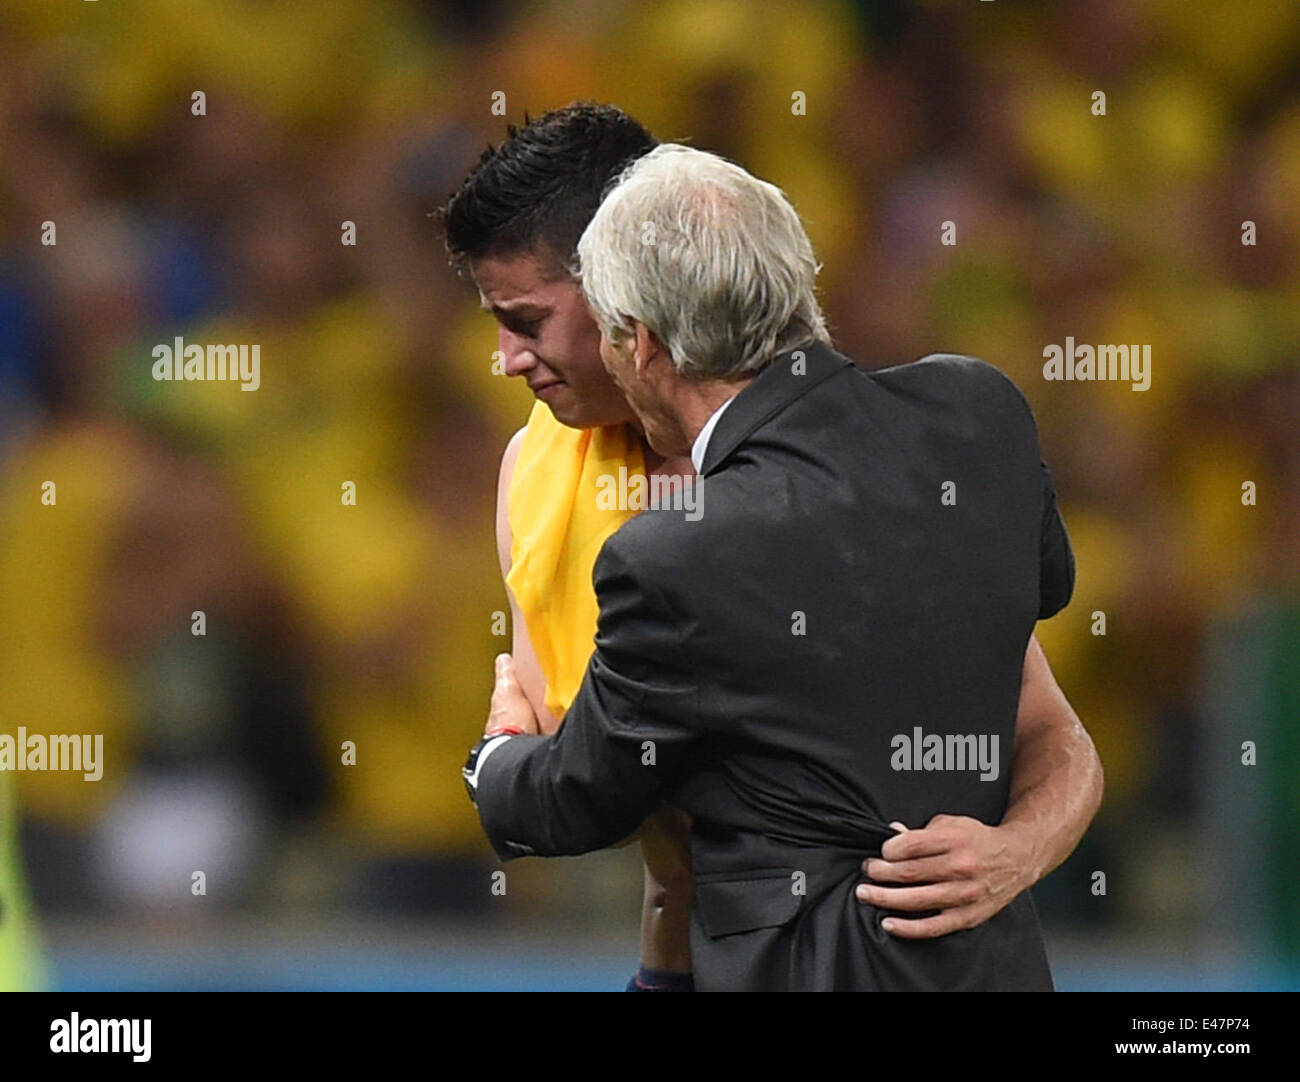 Fortaleza, Brazil. 04th July, 2014. Head coach Jose Pekerman (R) of Colombia hugs his player James Rodriguez after the FIFA World Cup 2014 quarter final match soccer between Brazil and Colombia at the Estadio Castelao in Fortaleza, Brazil, 04 July 2014. Photo: Marius Becker/dpa/Alamy Live News Stock Photo